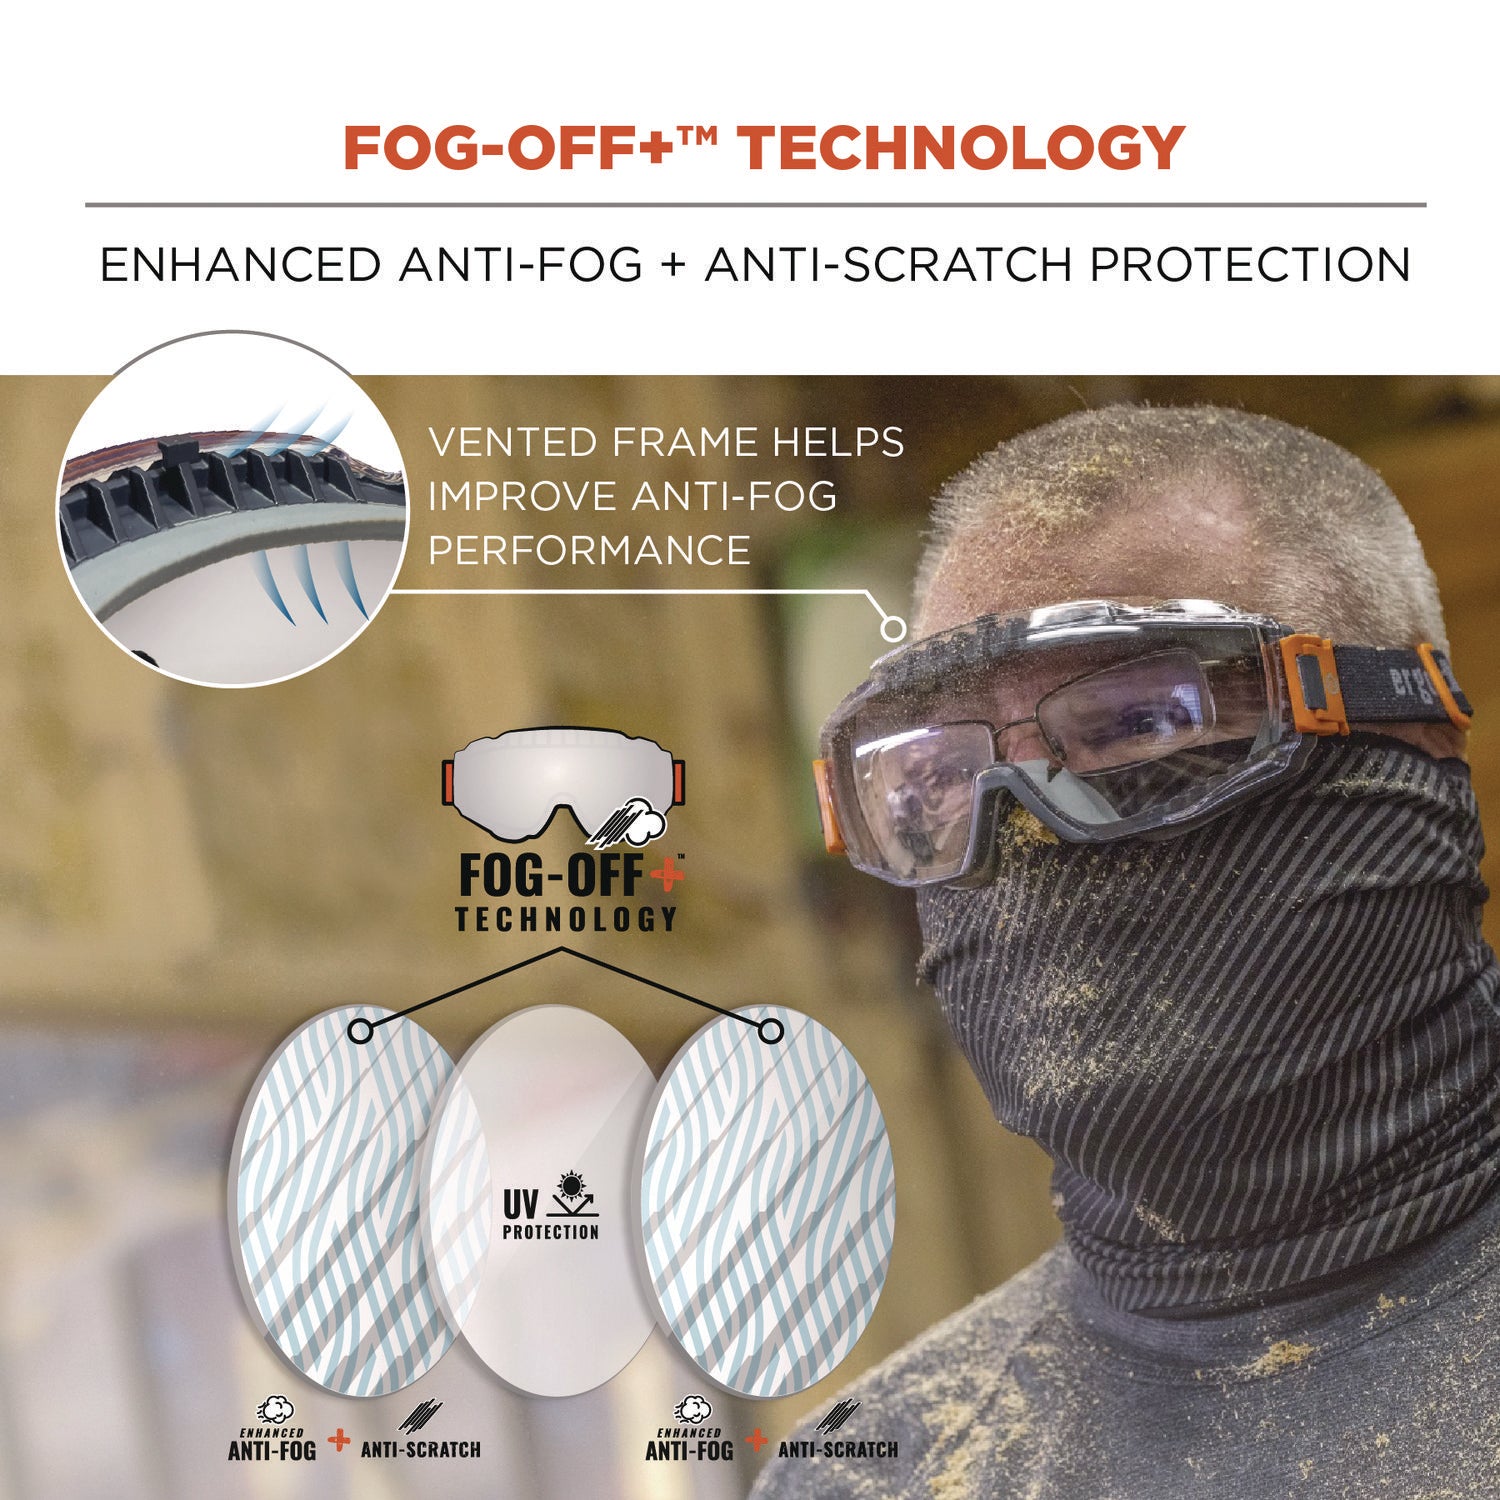 skullerz-modi-otg-anti-scratch-and-enhanced-anti-fog-safety-goggles-with-neoprene-strap-clear-lens-ships-in-1-3-bus-days_ego60302 - 4